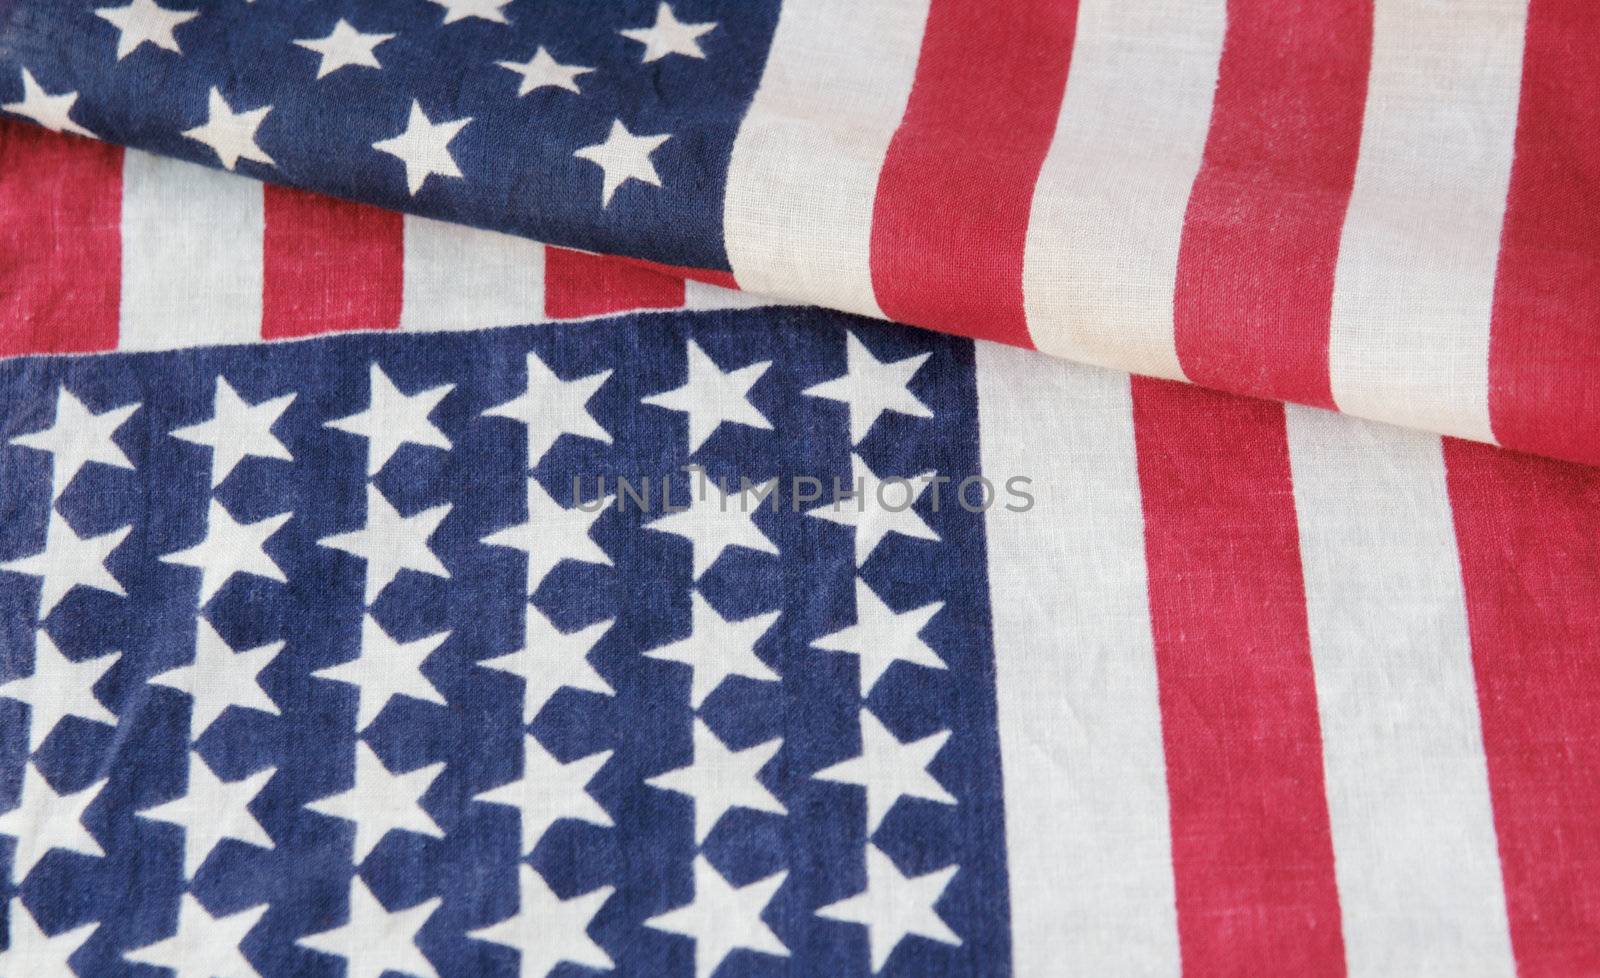 two American flags by nebari